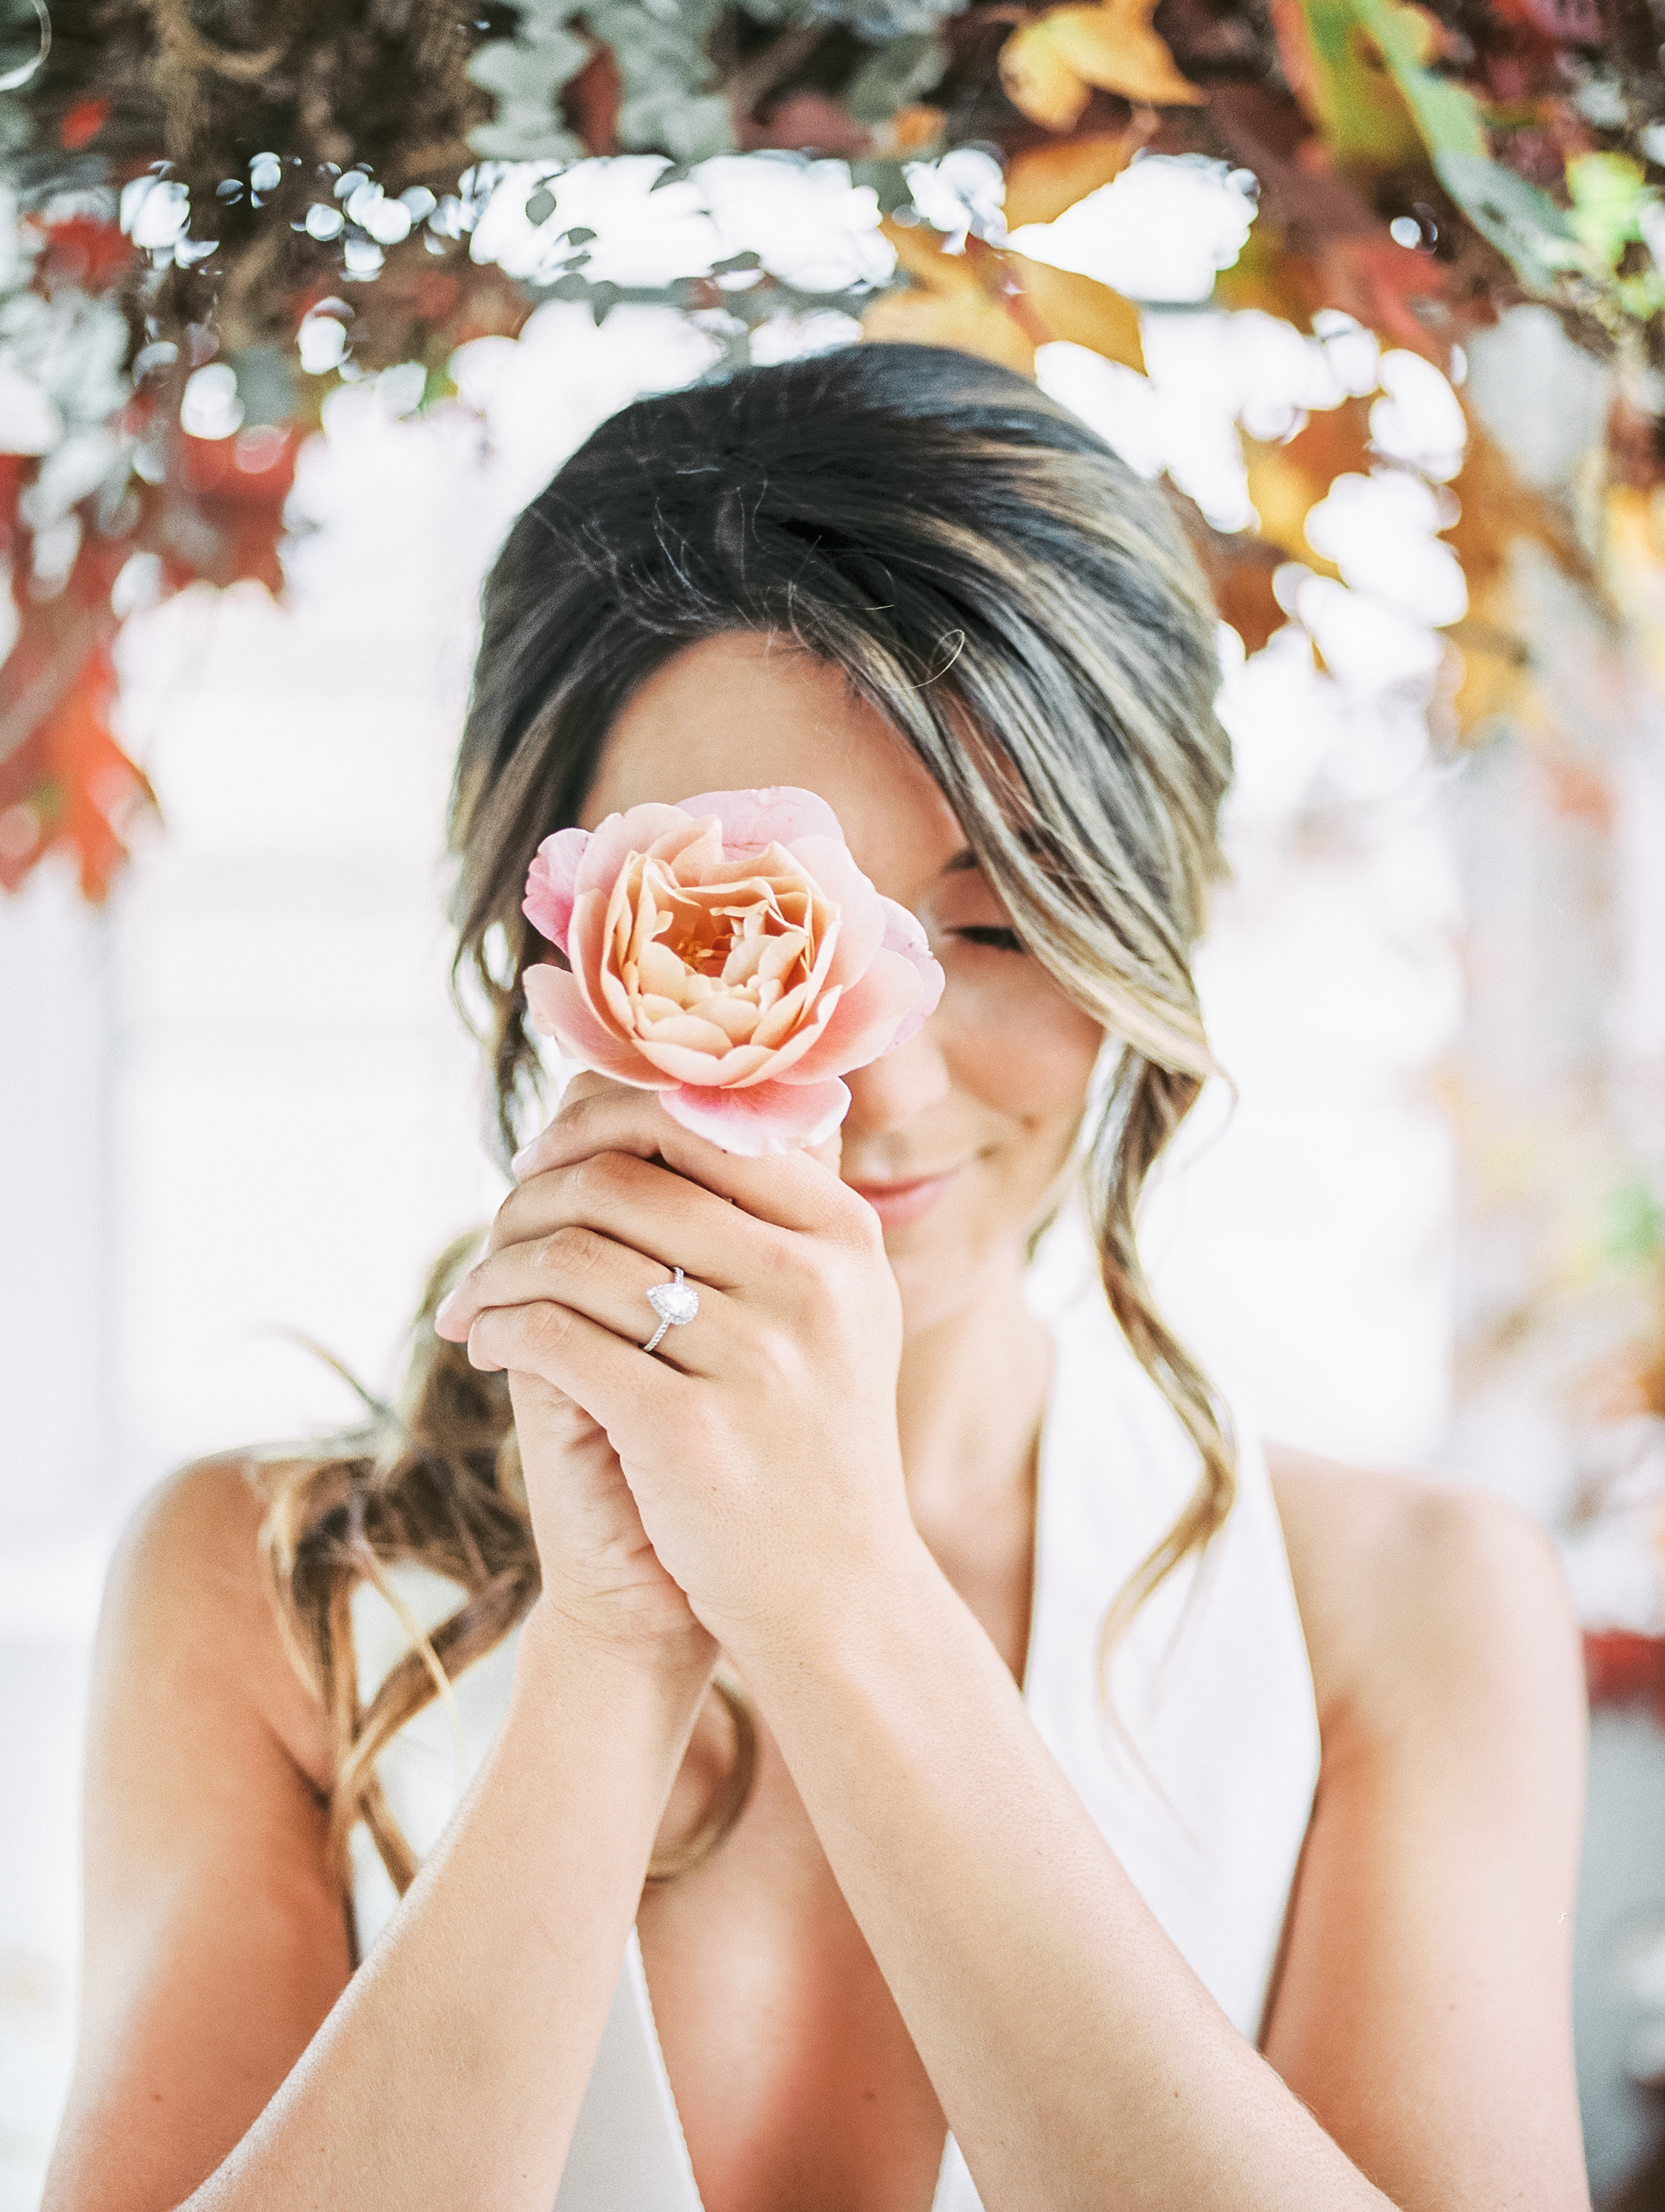 Distant Drum Roses | The Day's Design | Samantha James Phtoography